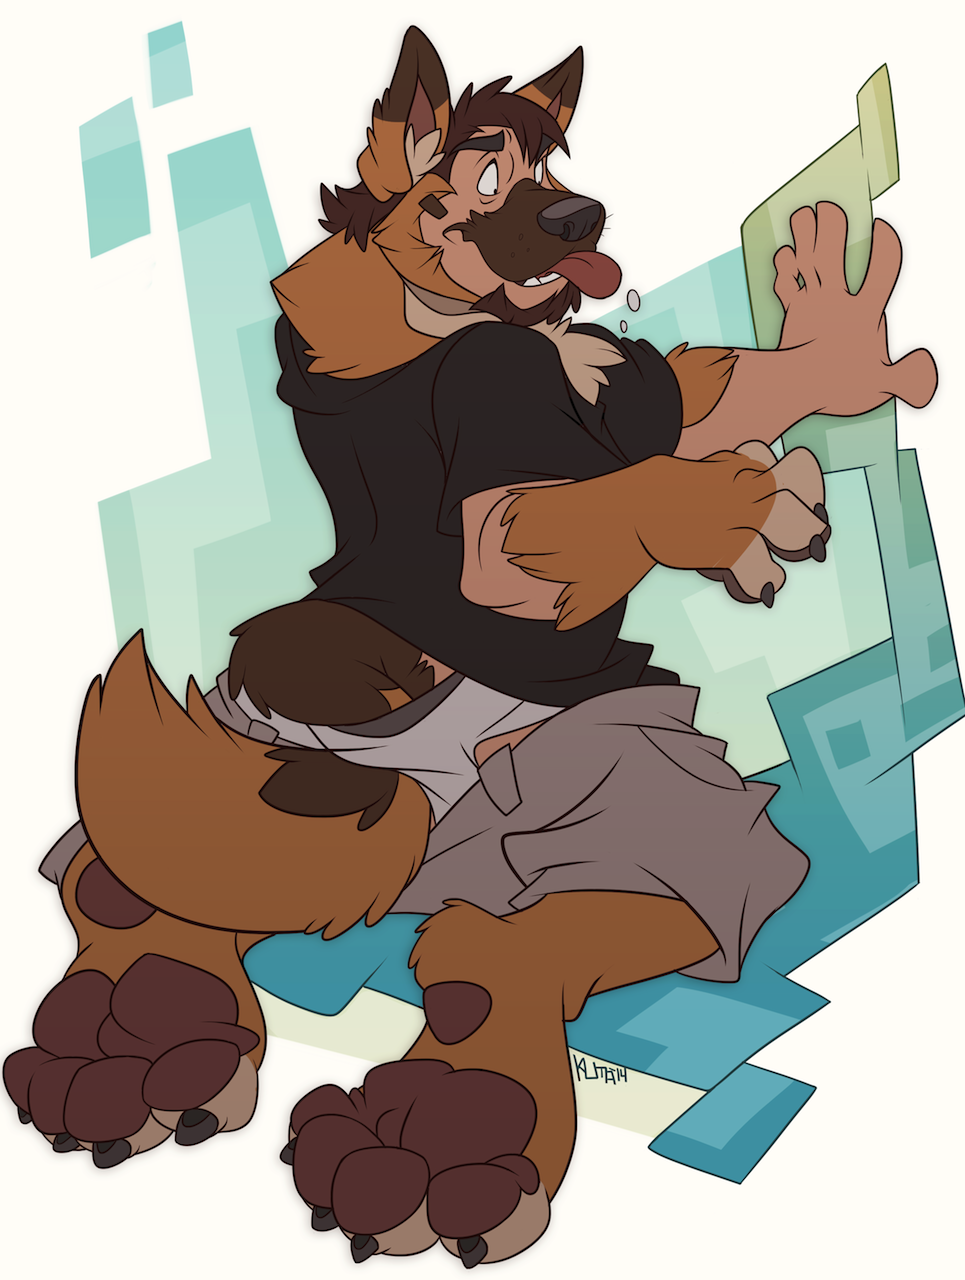 Most recent image: German Sheppy TF